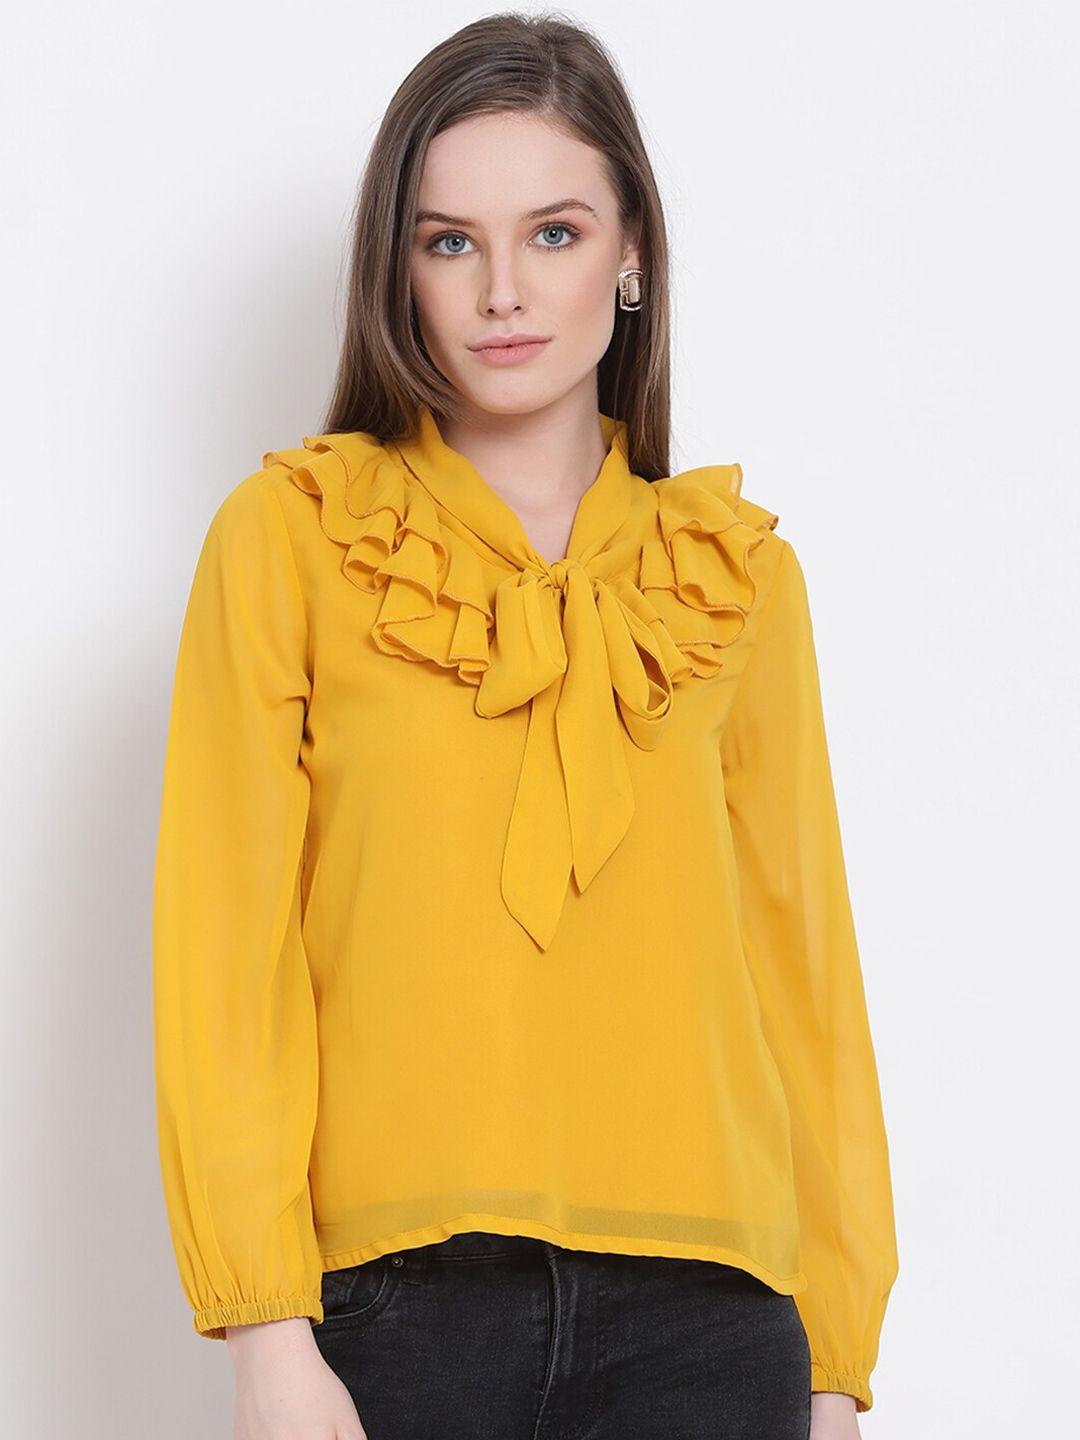 draax fashions yellow tie-up neck georgette regular top